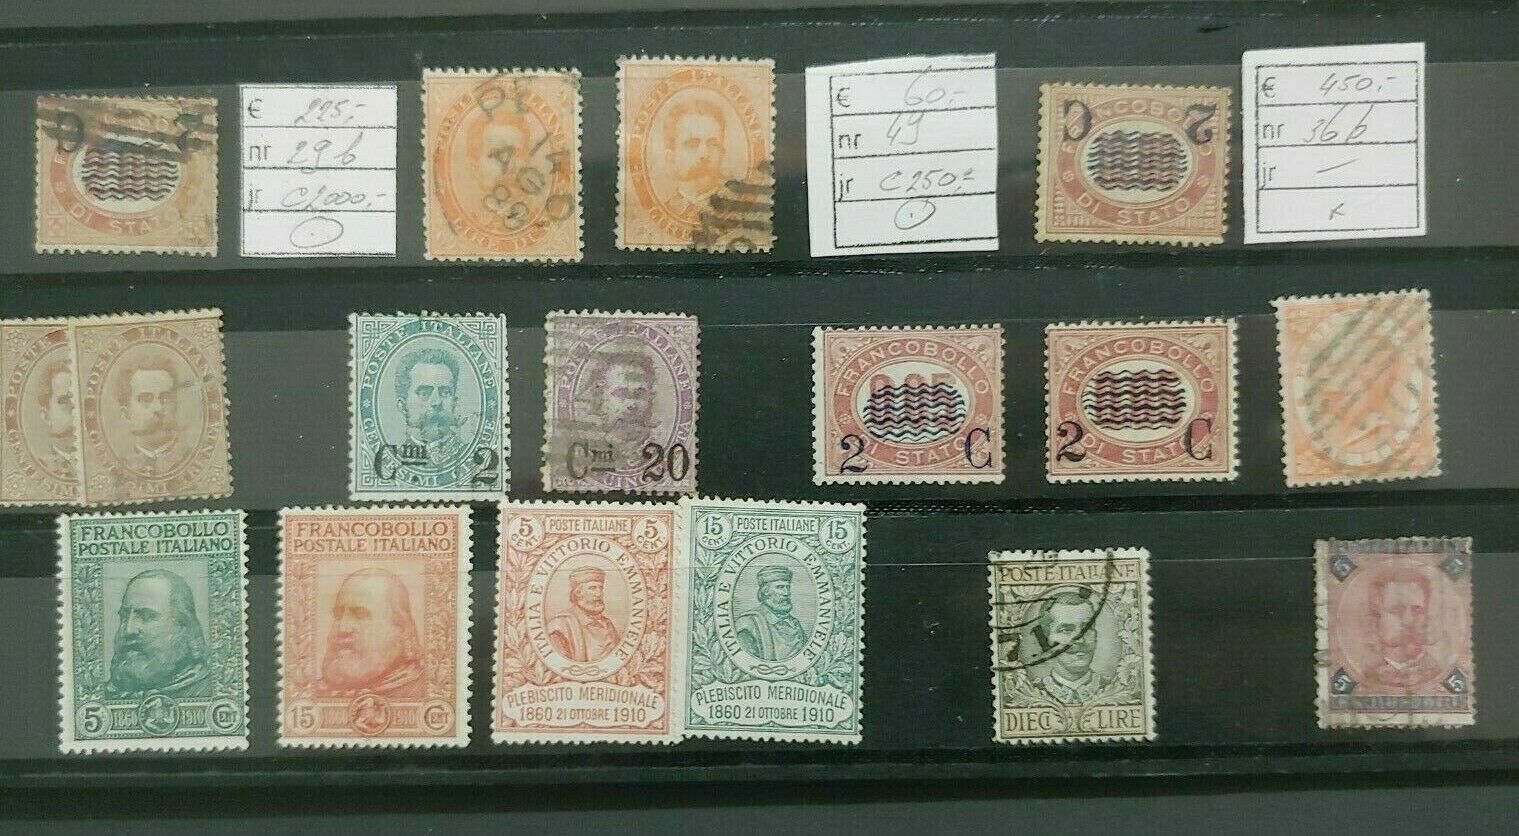 CLASSIC LOT ITALY ITALIA INCL INVERSED SURCH VF USED VF MLH WK306 START 099